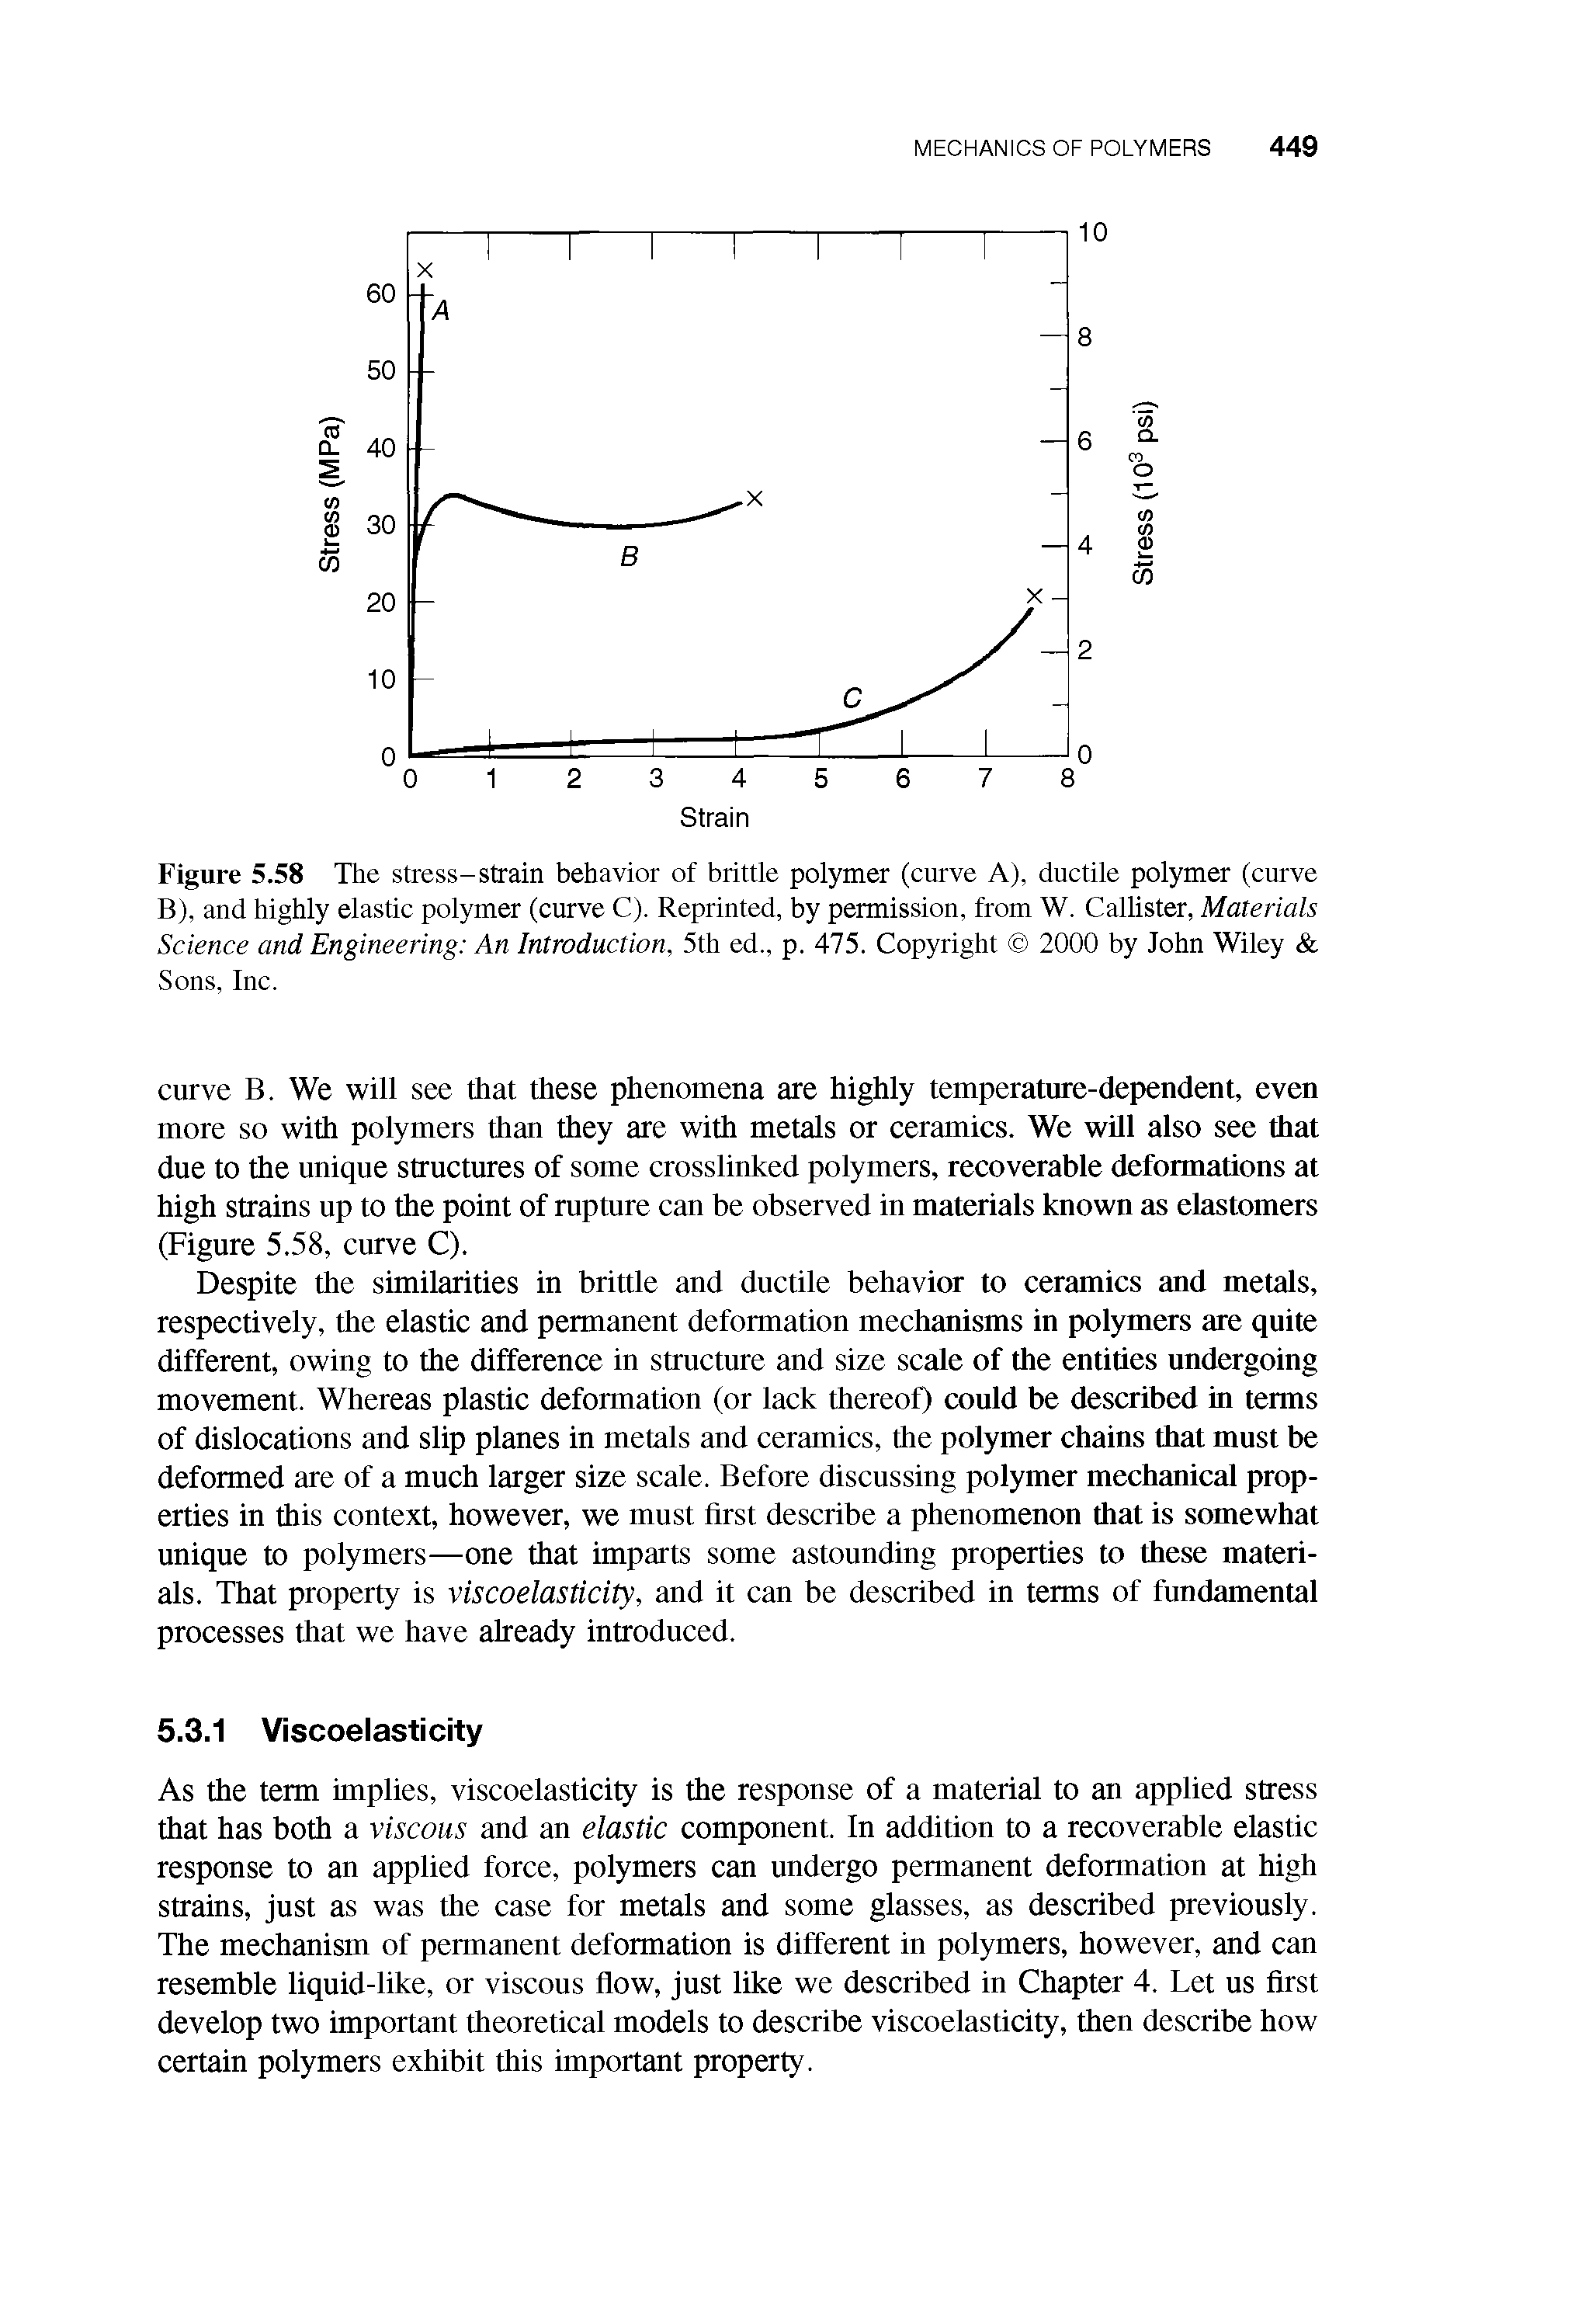 Figure 5.58 The stress-strain behavior of brittle polymer (curve A), ductile polymer (curve B), and highly elastic polymer (curve C). Reprinted, by permission, from W. Callister, Materials Science and Engineering An Introduction, 5th ed., p. 475. Copyright 2000 by John Wiley Sons, Inc.